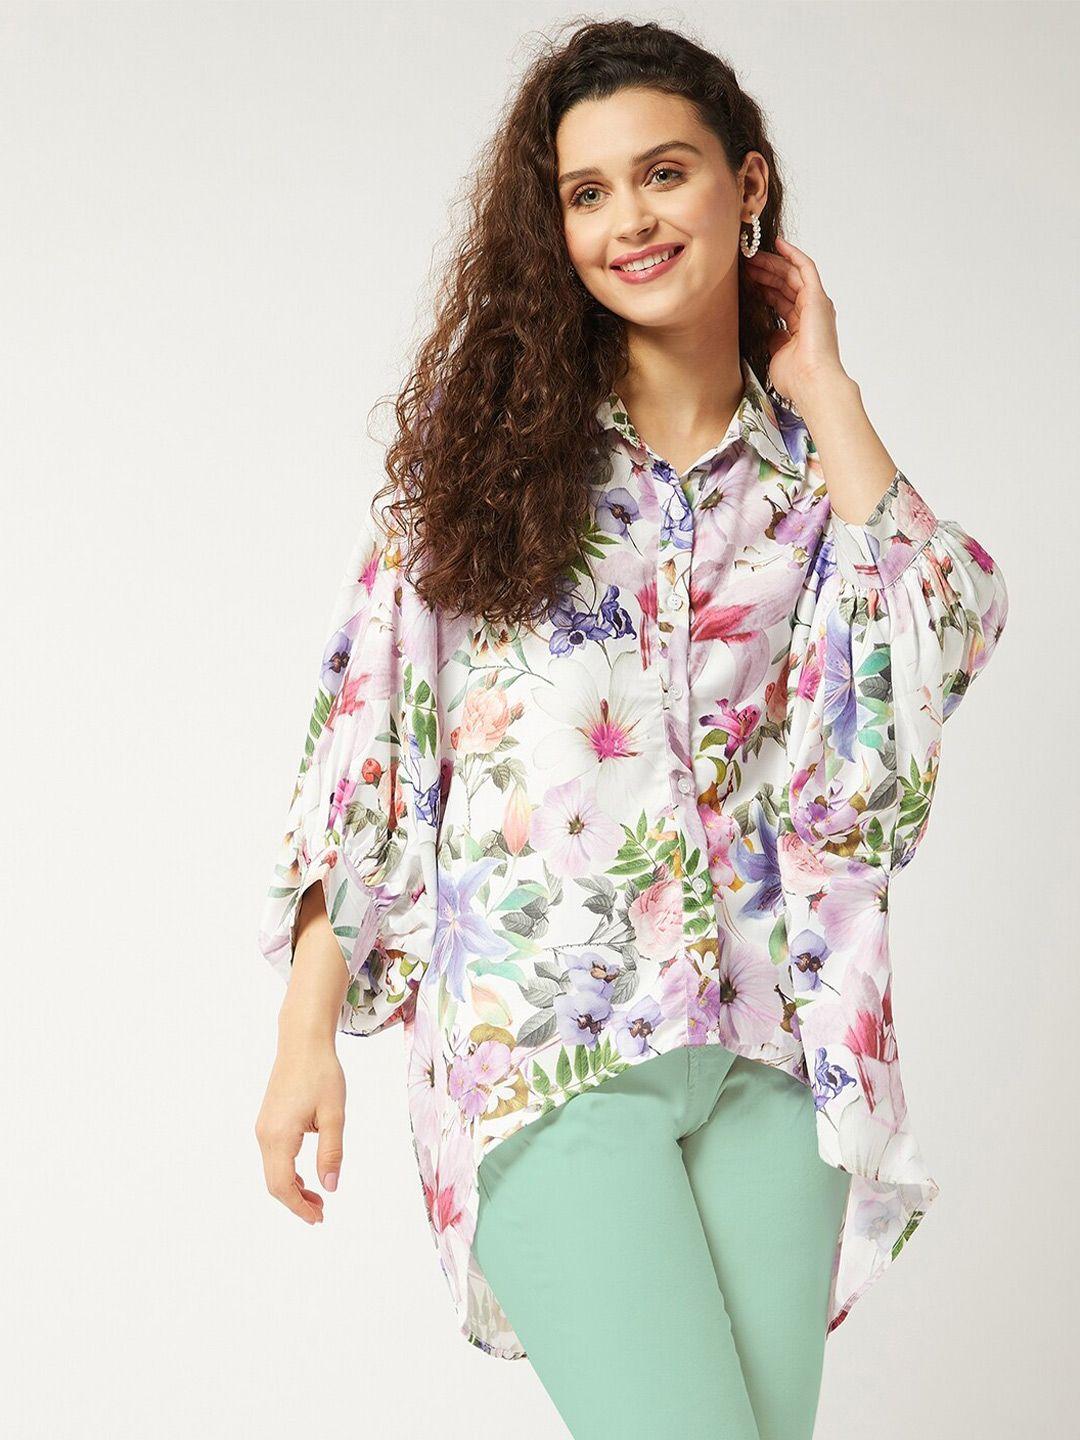 zima leto floral print extended sleeves shirt style top